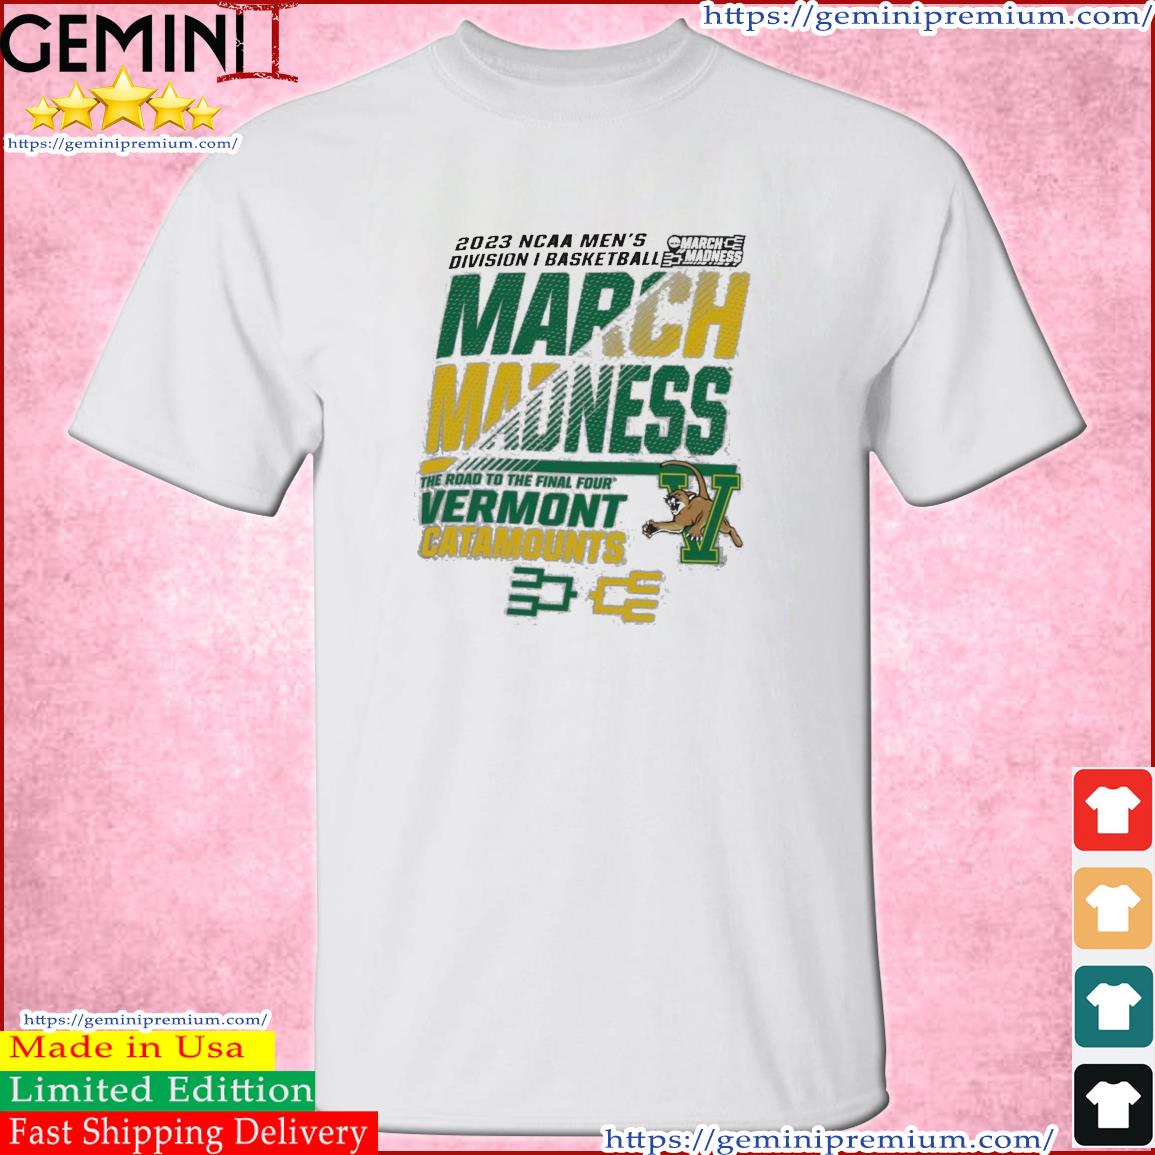 Vermont Men's Basketball 2023 NCAA March Madness The Road To Final Four Shirt